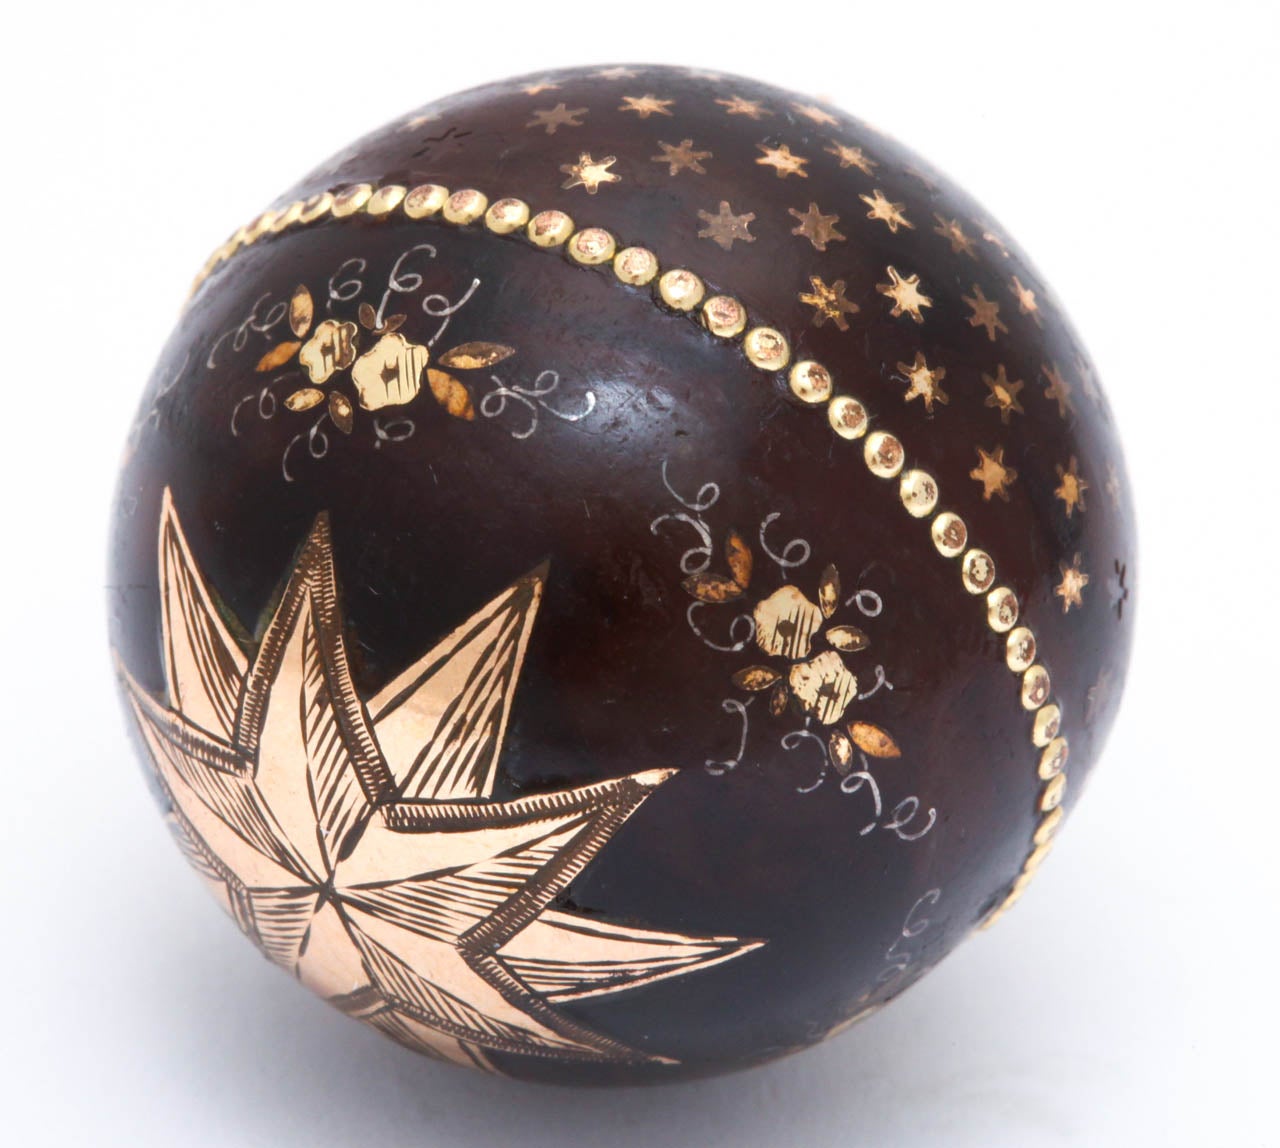 Beads of Gold and Heavenly Stars and Flowers on a Pique Ball Pendant 1